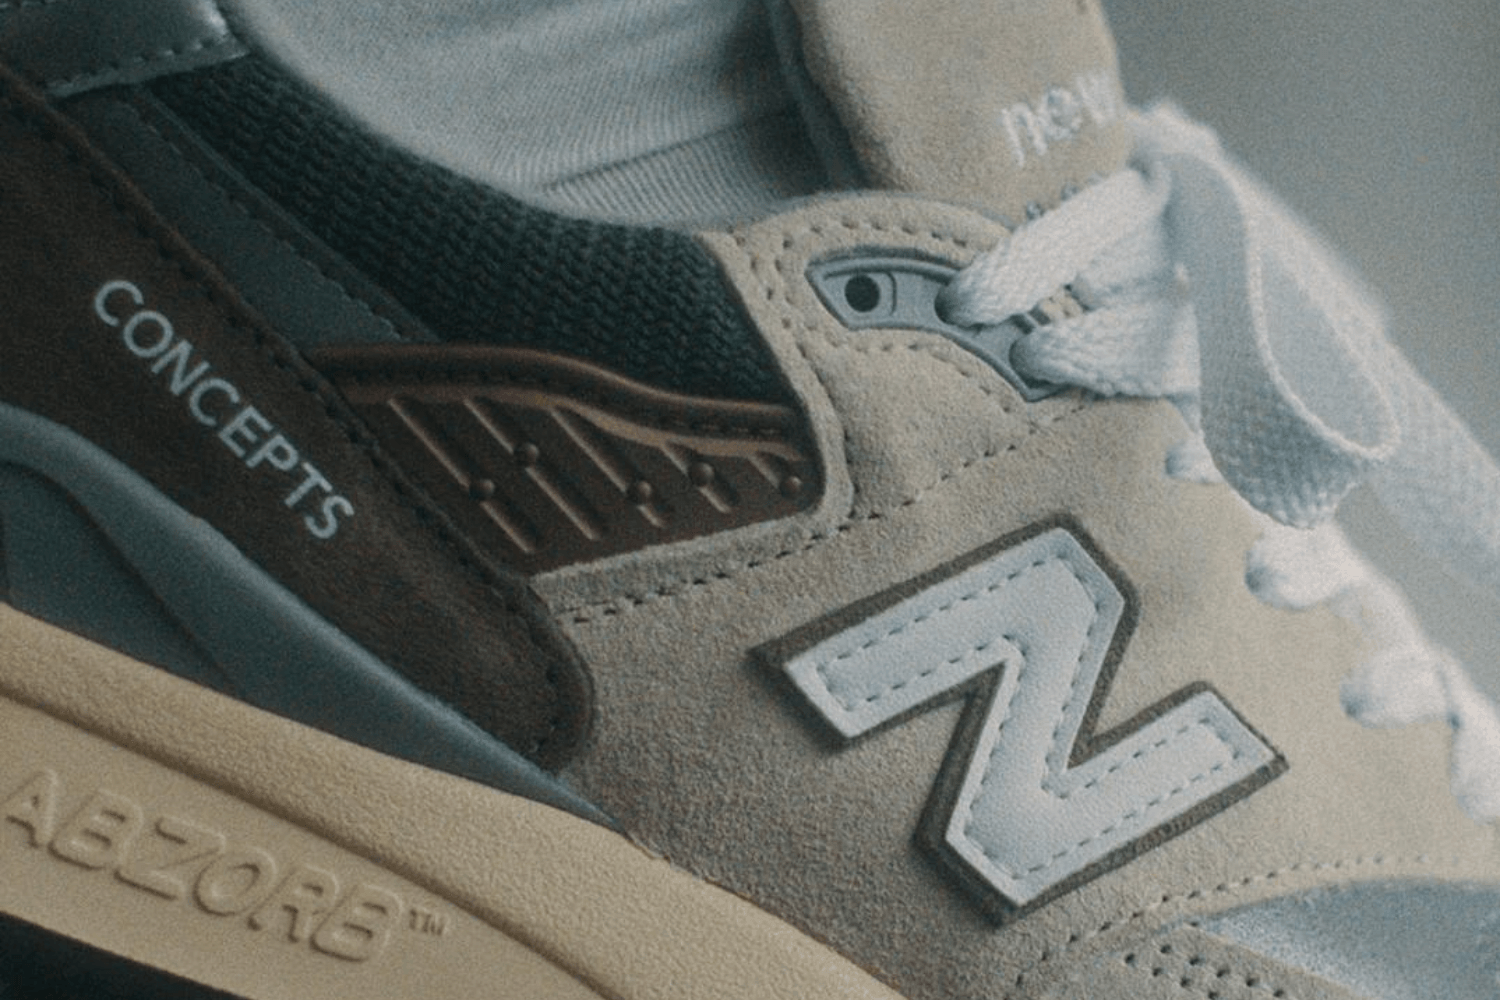 Release reminder: Concepts x New Balance 998 'C-Note'